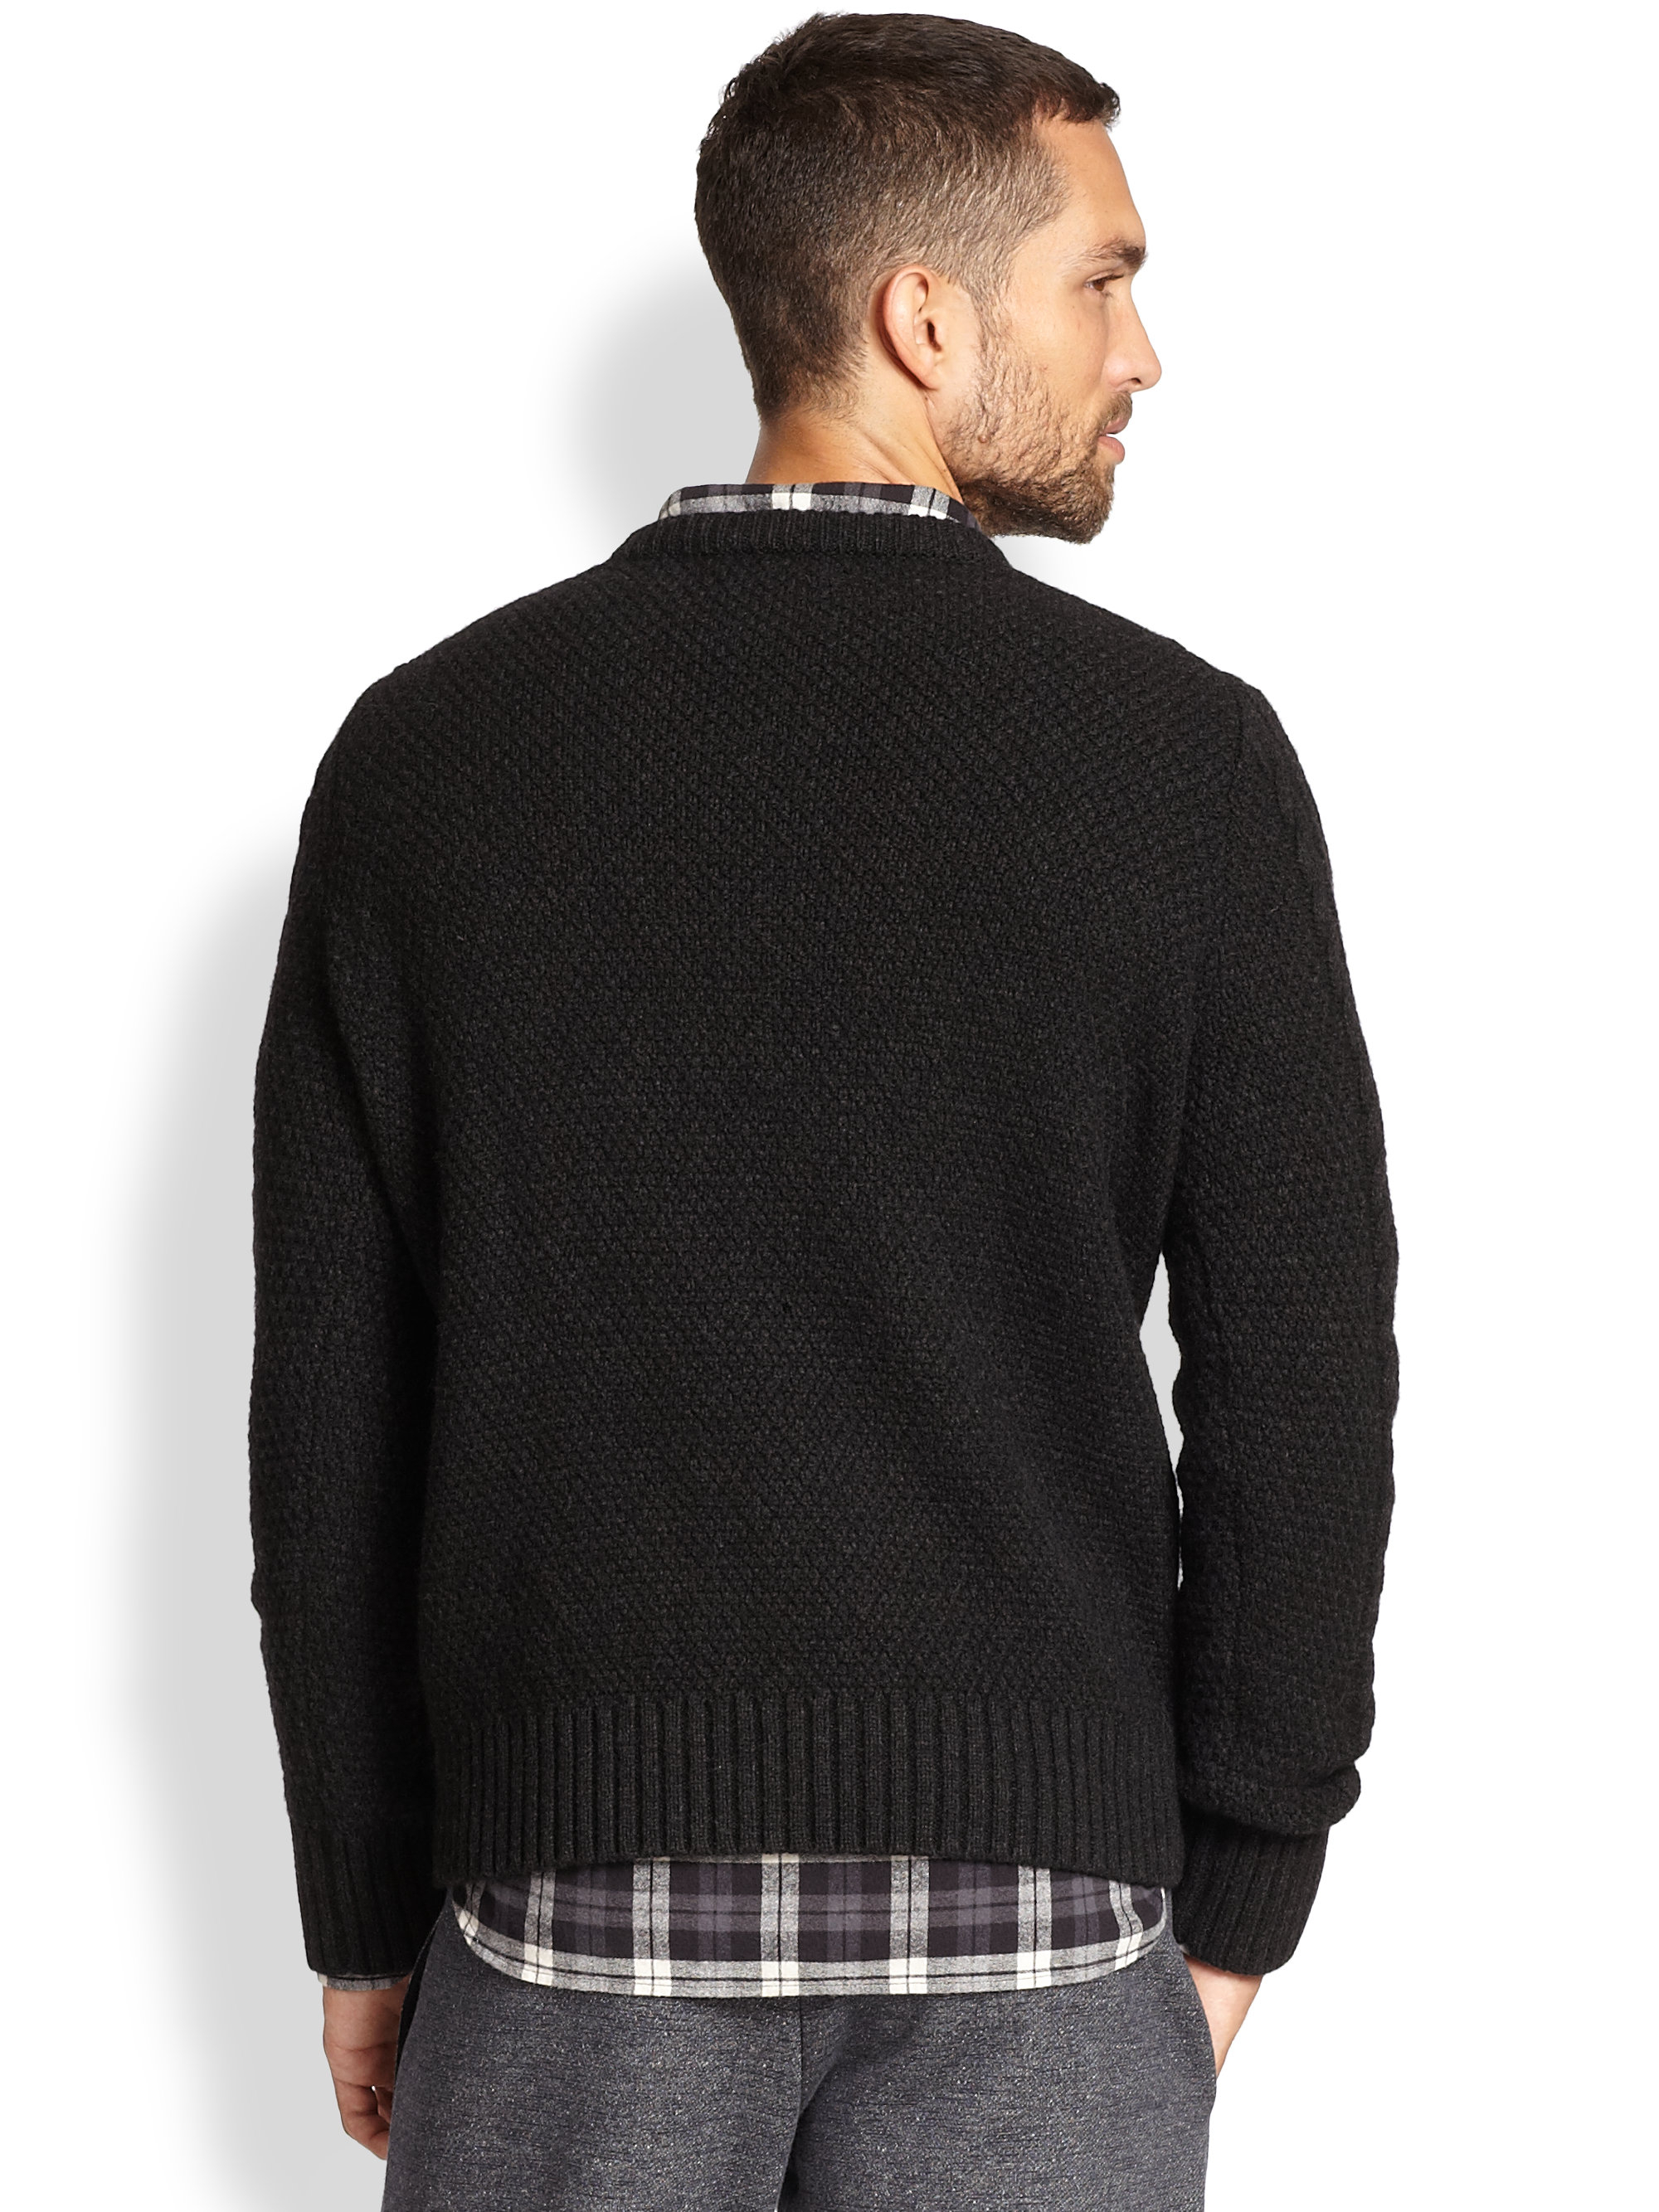 Lyst Vince Cable Knit Crewneck Sweater in Black for Men